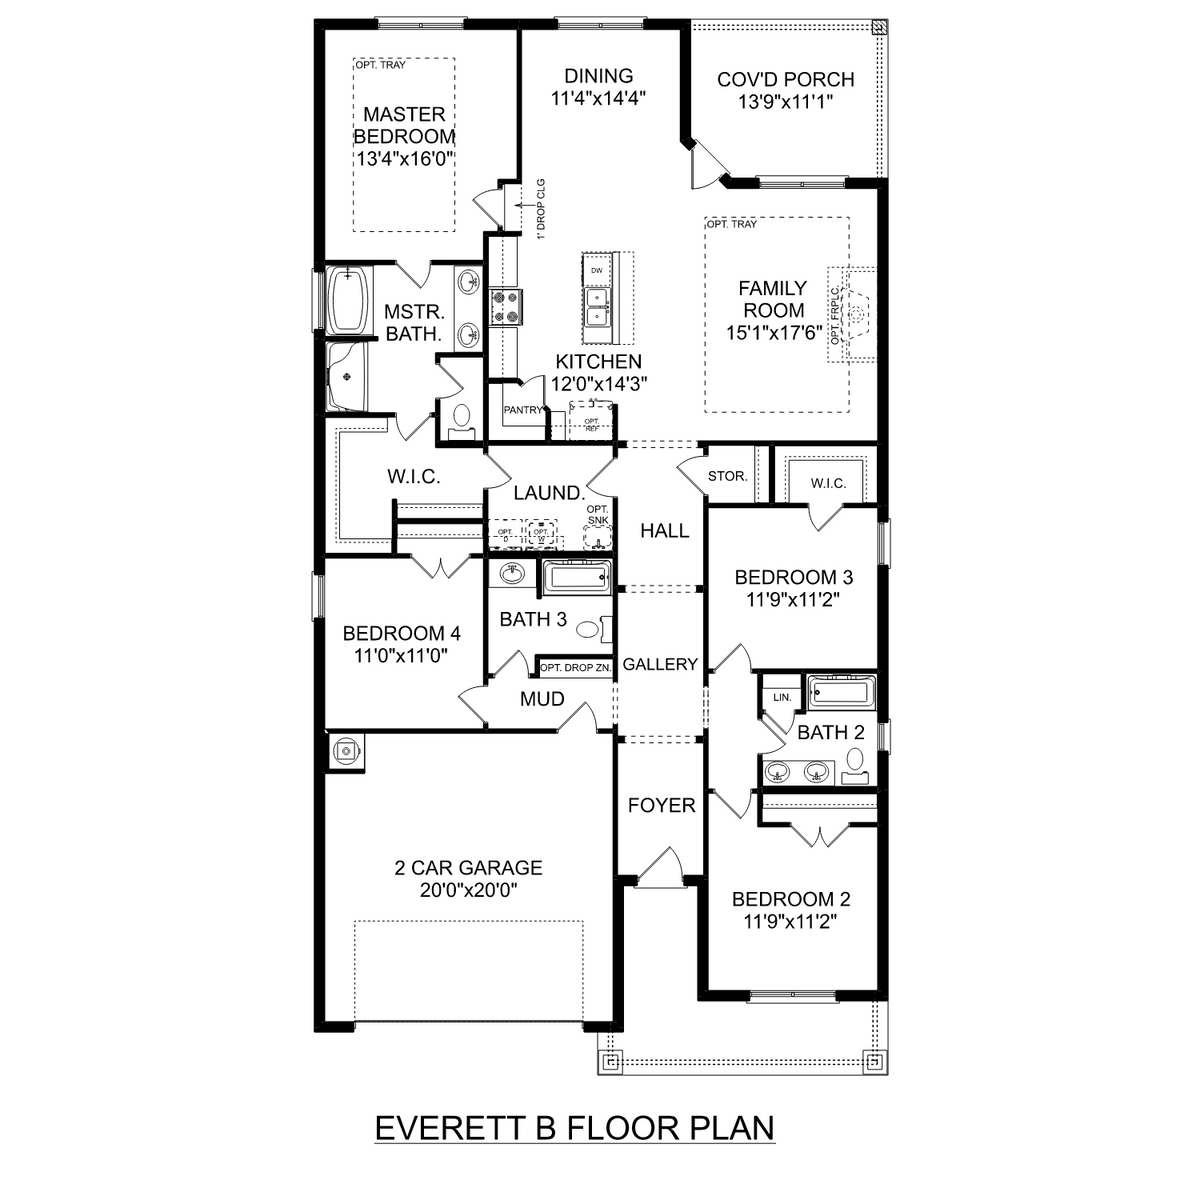 1 - The Everett B floor plan layout for 145 River Pointe Drive in Davidson Homes' Flint Meadows community.